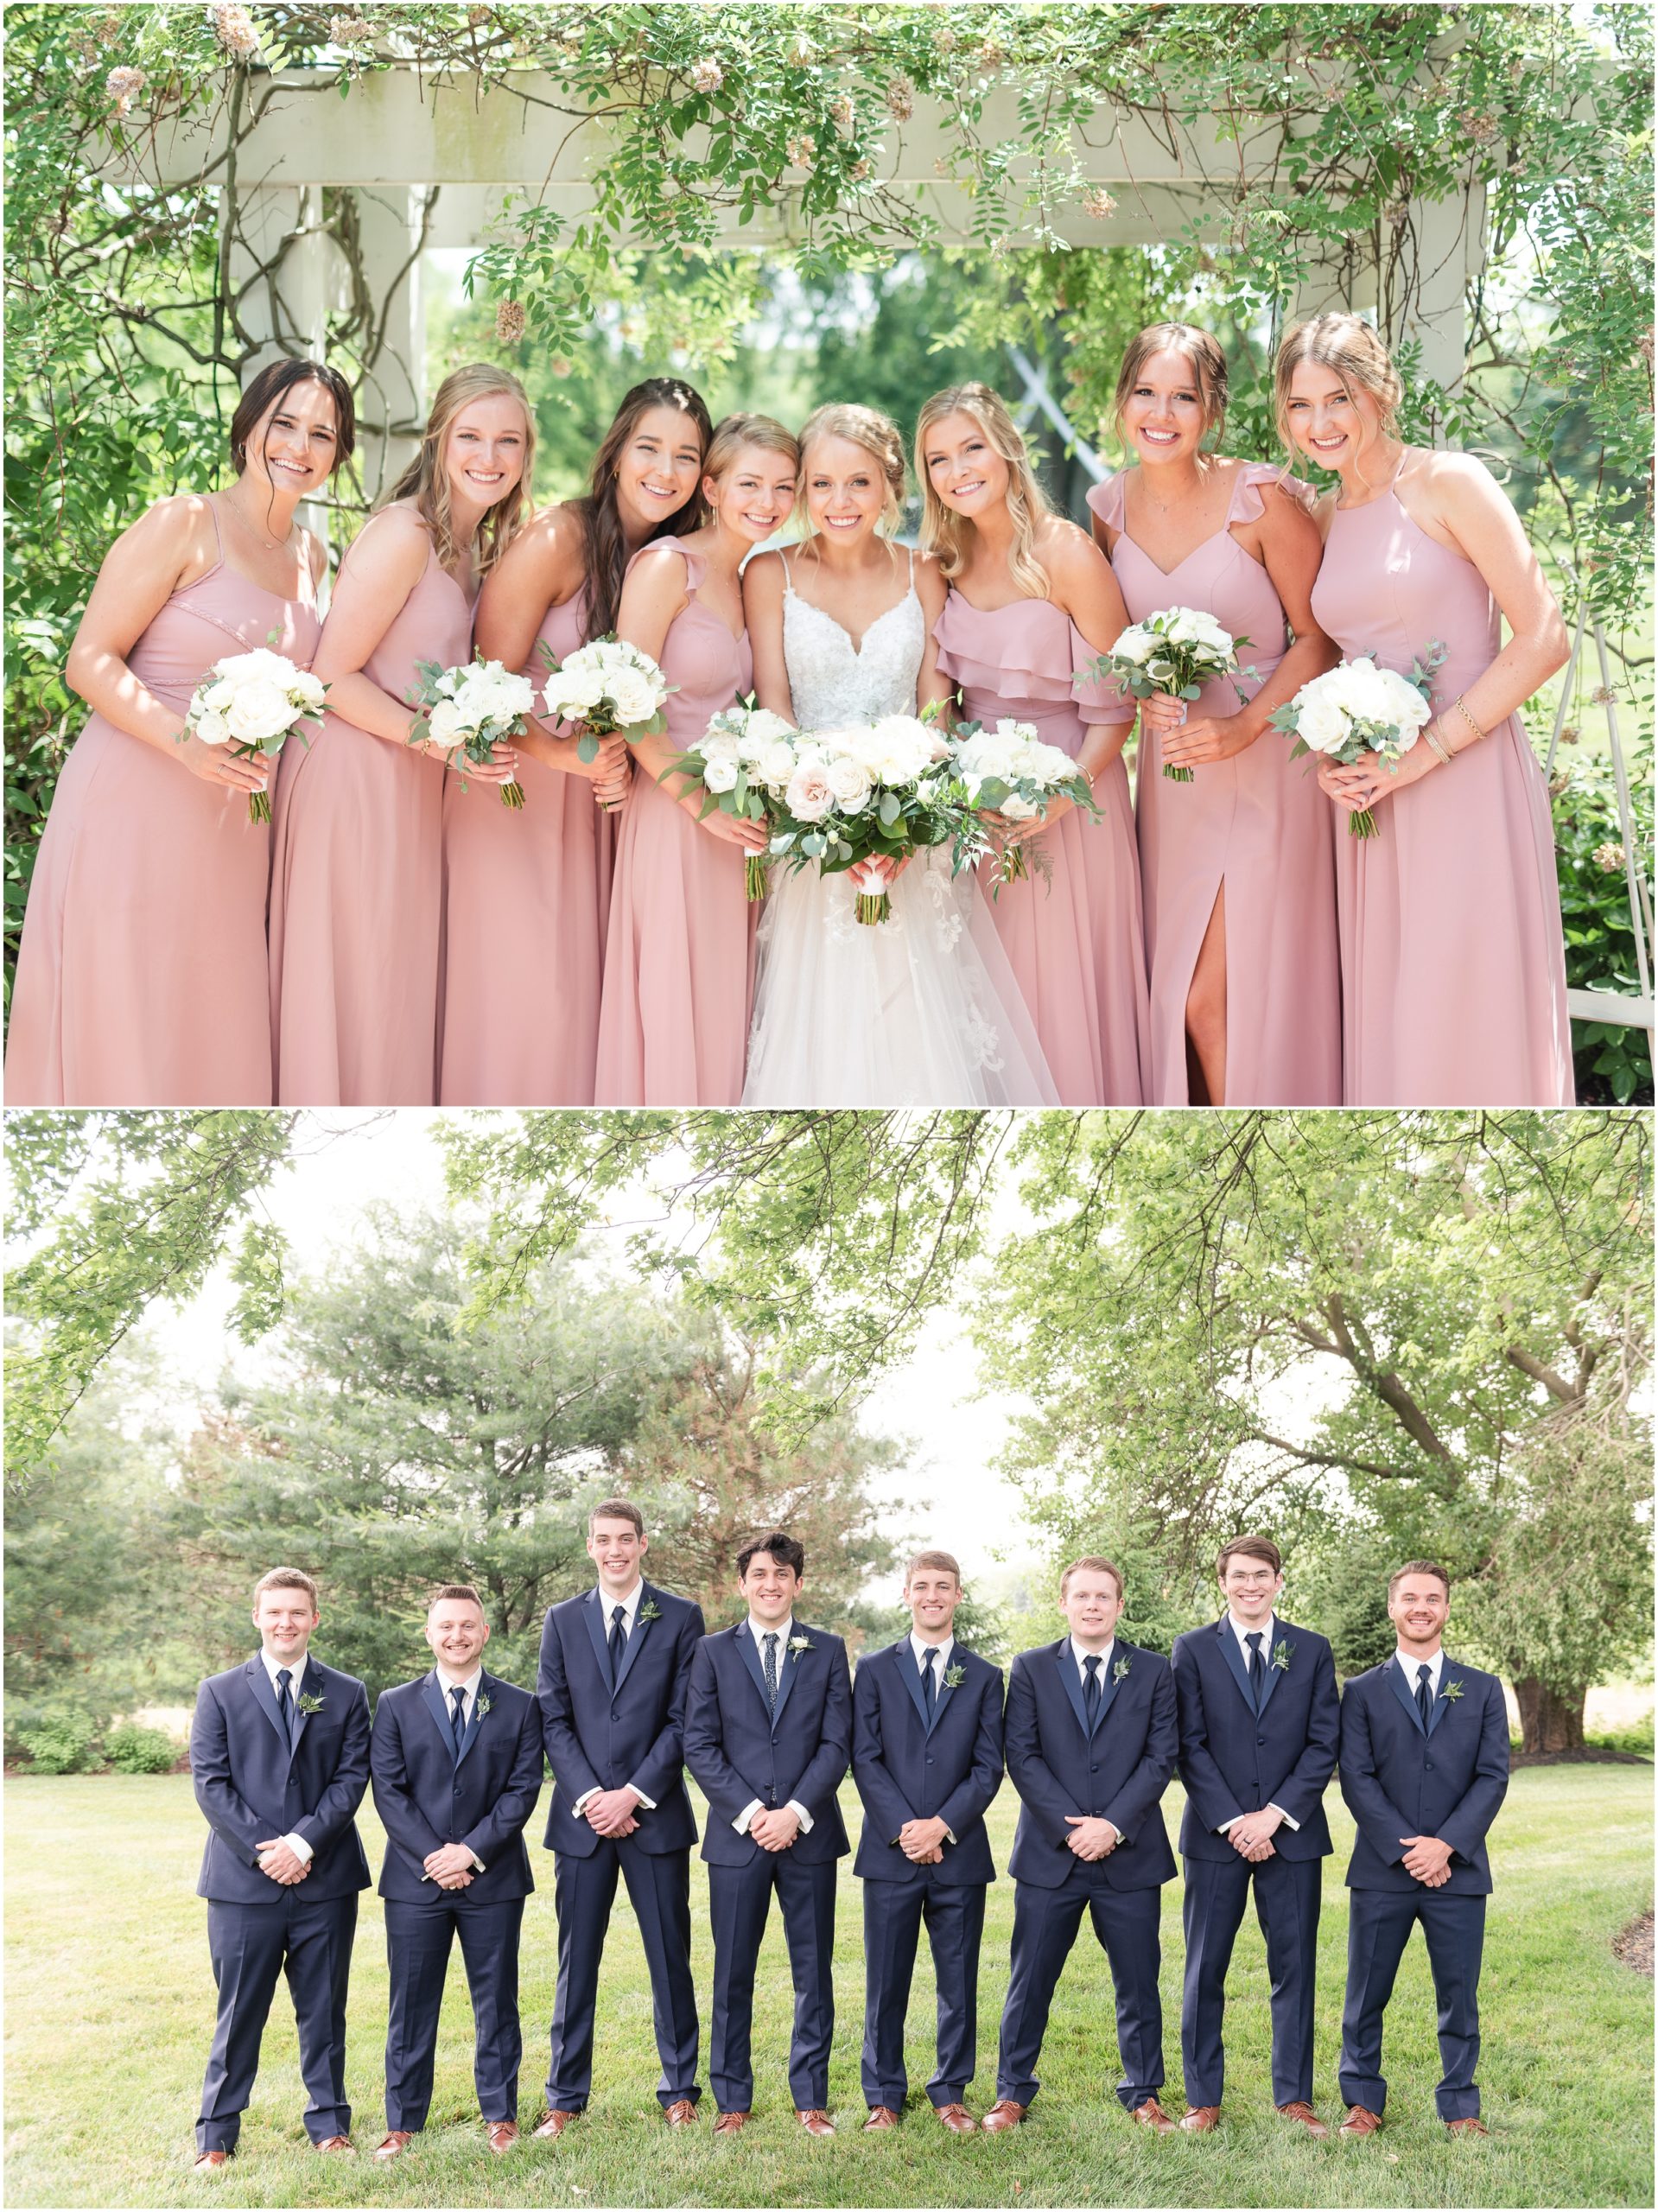 Bridal Party photos at Mustard Seed Gardens Noblesville, IN